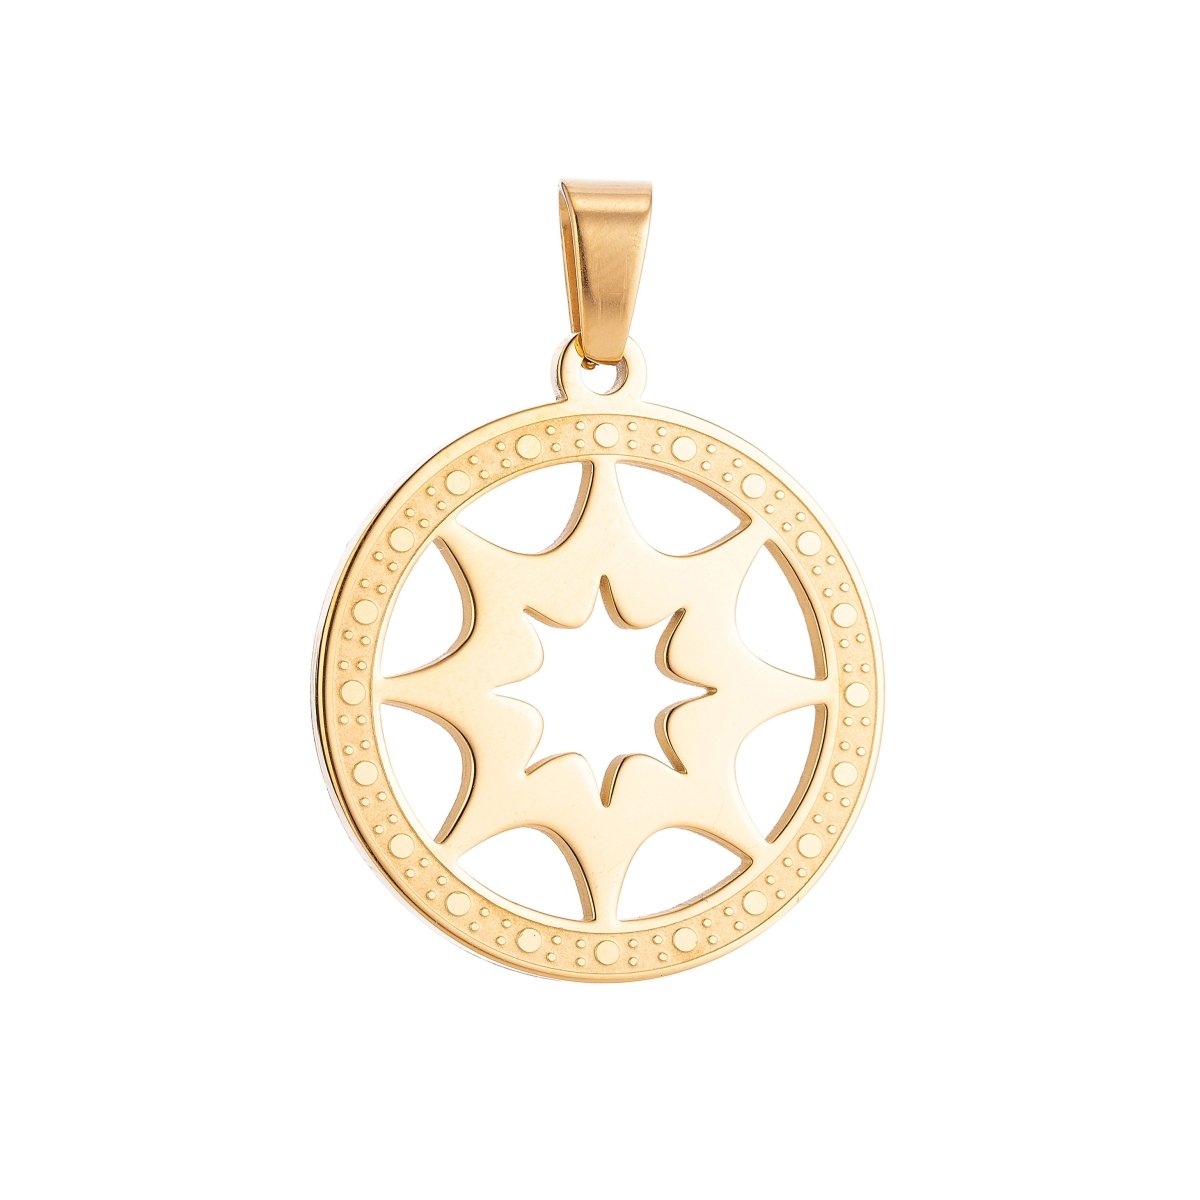 Gold Filled Sun Ray Symbol in Coin Medallion Necklace Pendant Bracelet Earring Charm Bails for Jewelry Making J-366 - DLUXCA